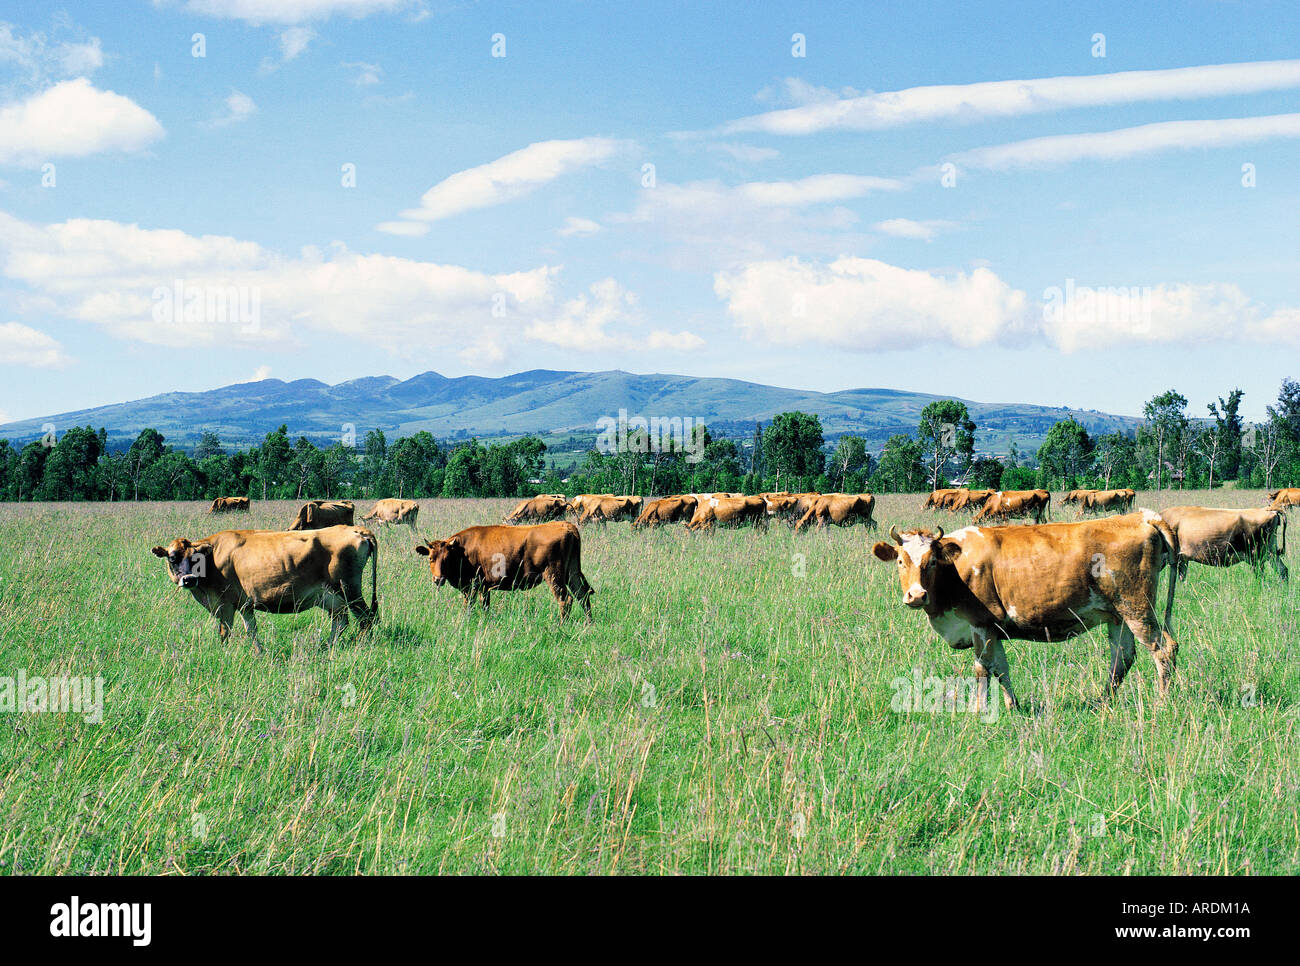 Dairy cows near Karen with the Ngong Hills in the background 10 miles south of Nairobi Kenya East Africa Stock Photo